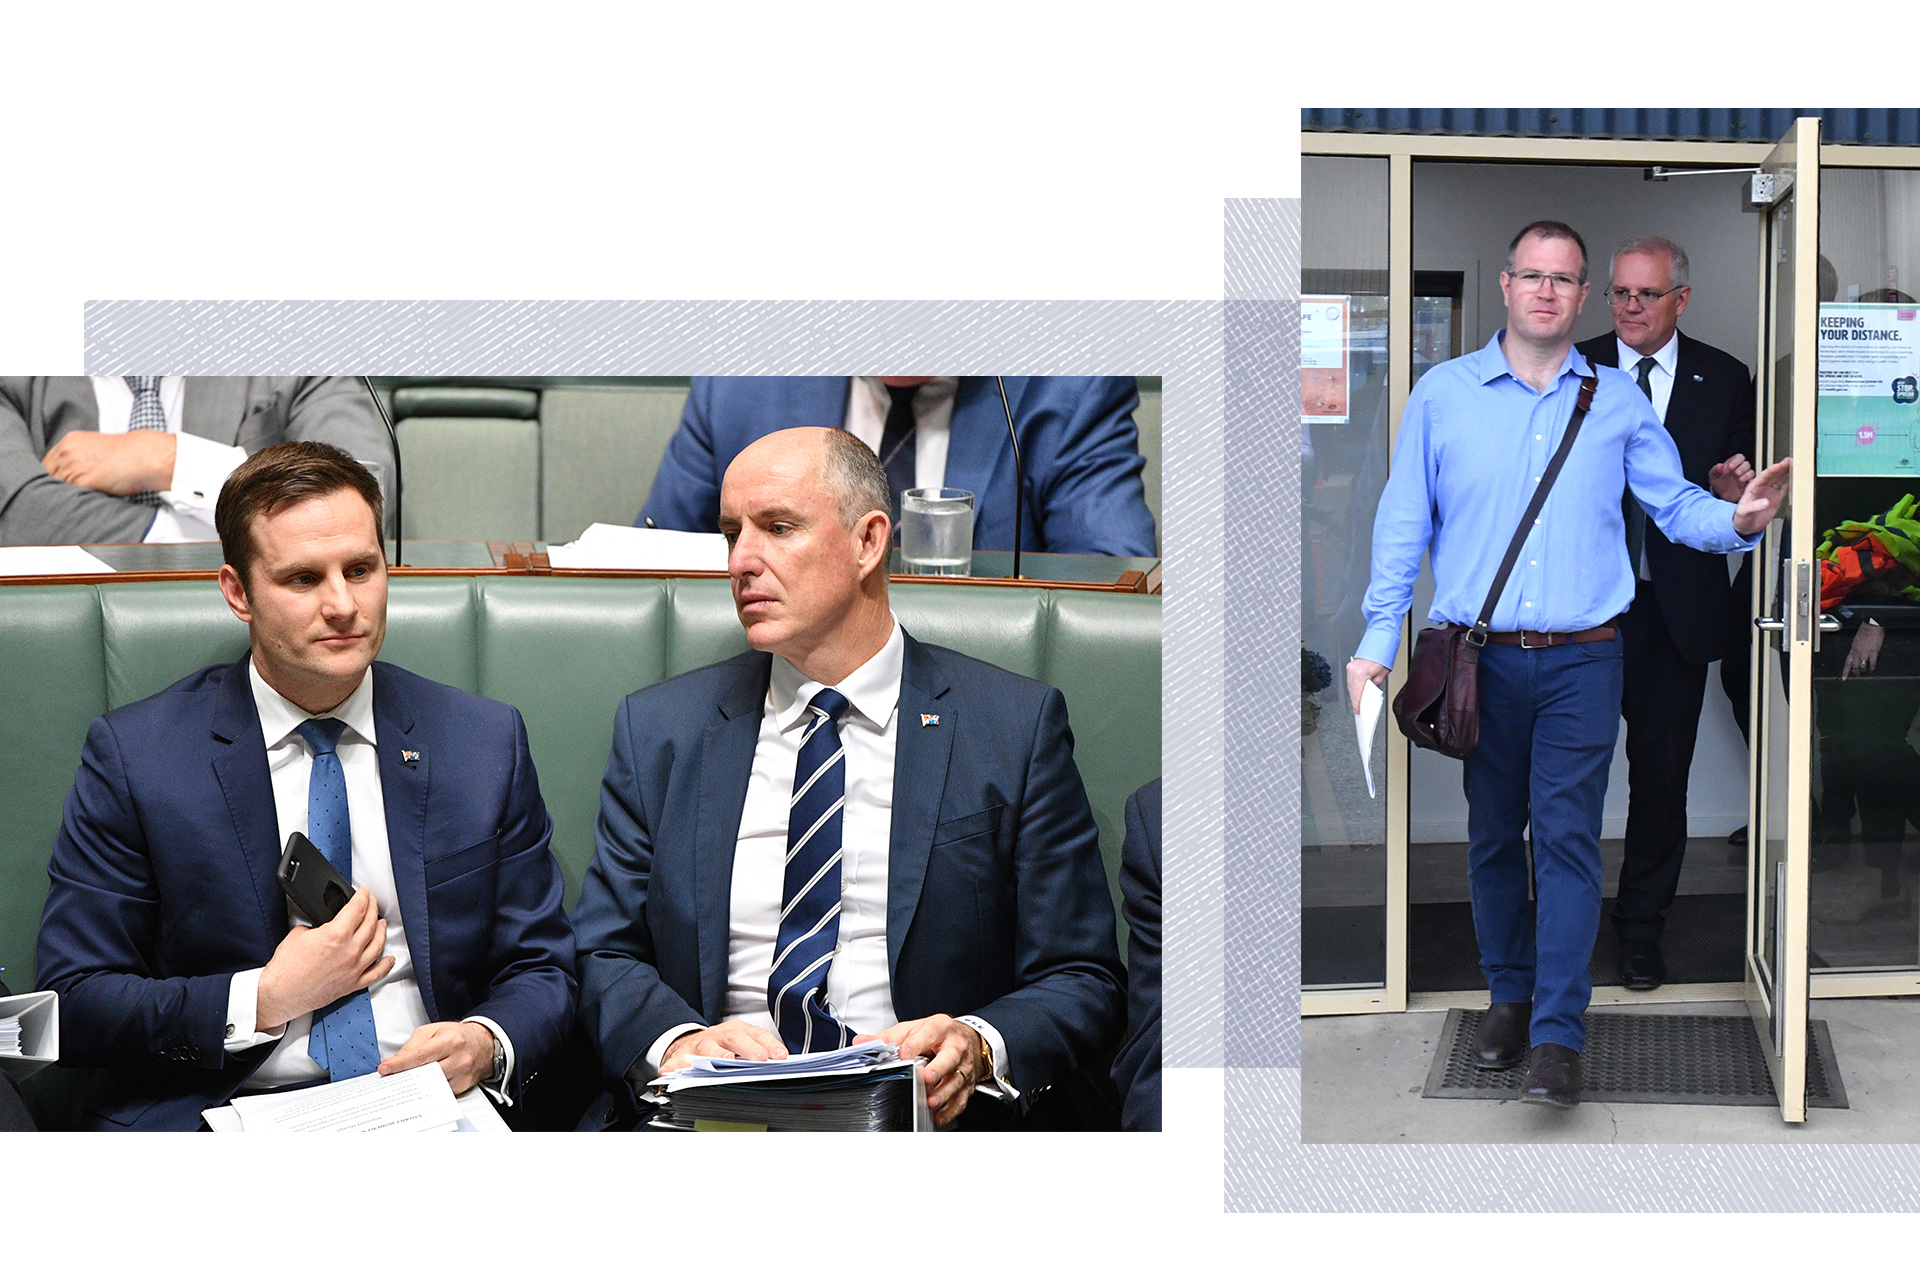 Alex Hawke and Stuart Robert sitting in parliament beside a photo of Ben Morton and Scott Morrison walking out of a building.